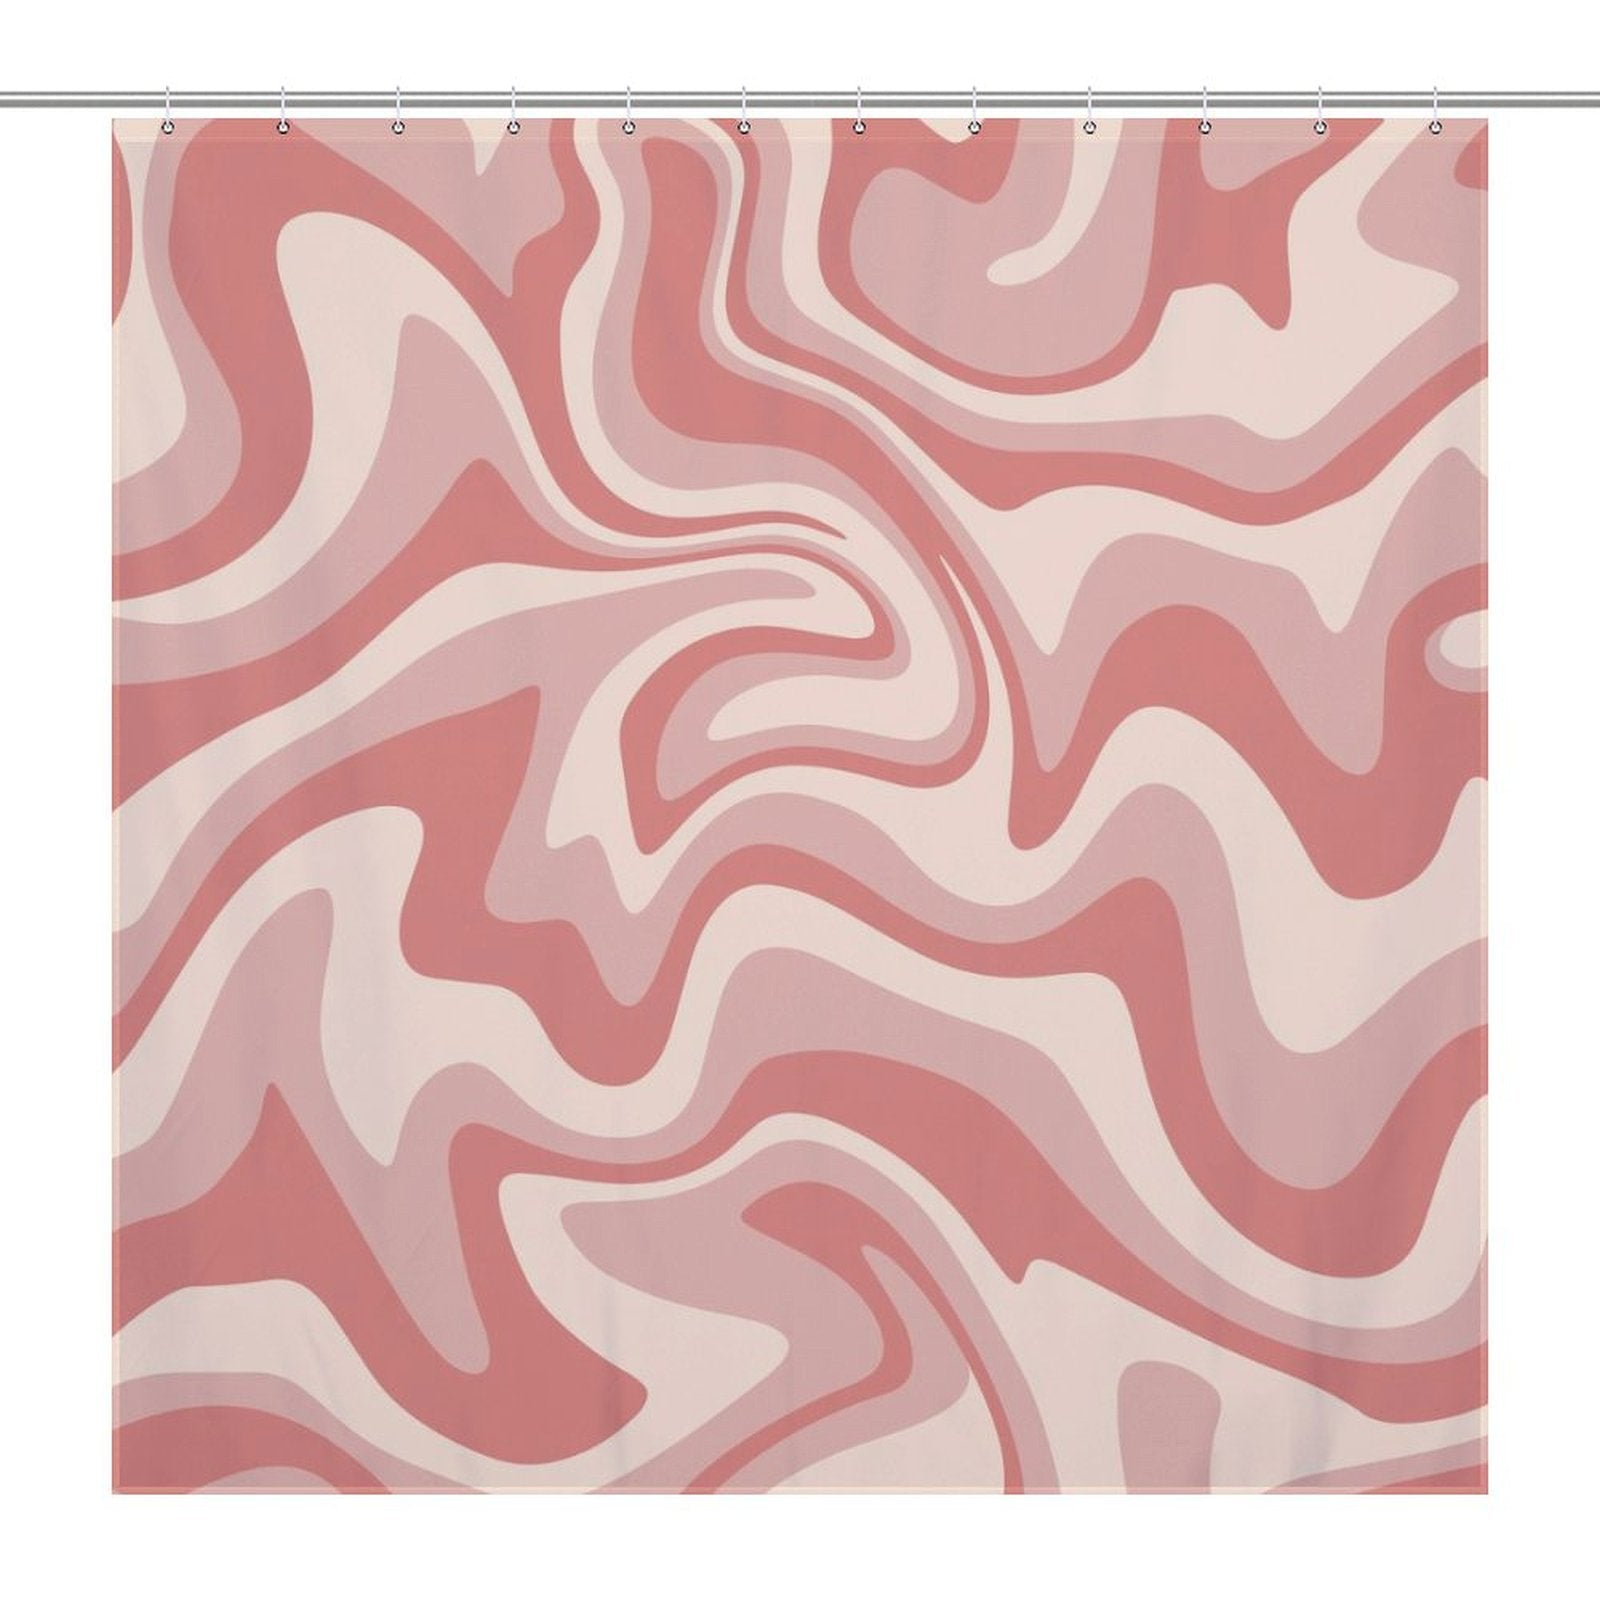 A Vintage Modern Wave 70s Cute Wavy Swirl Retro Pink Abstract Shower Curtain-Cottoncat by Cotton Cat.